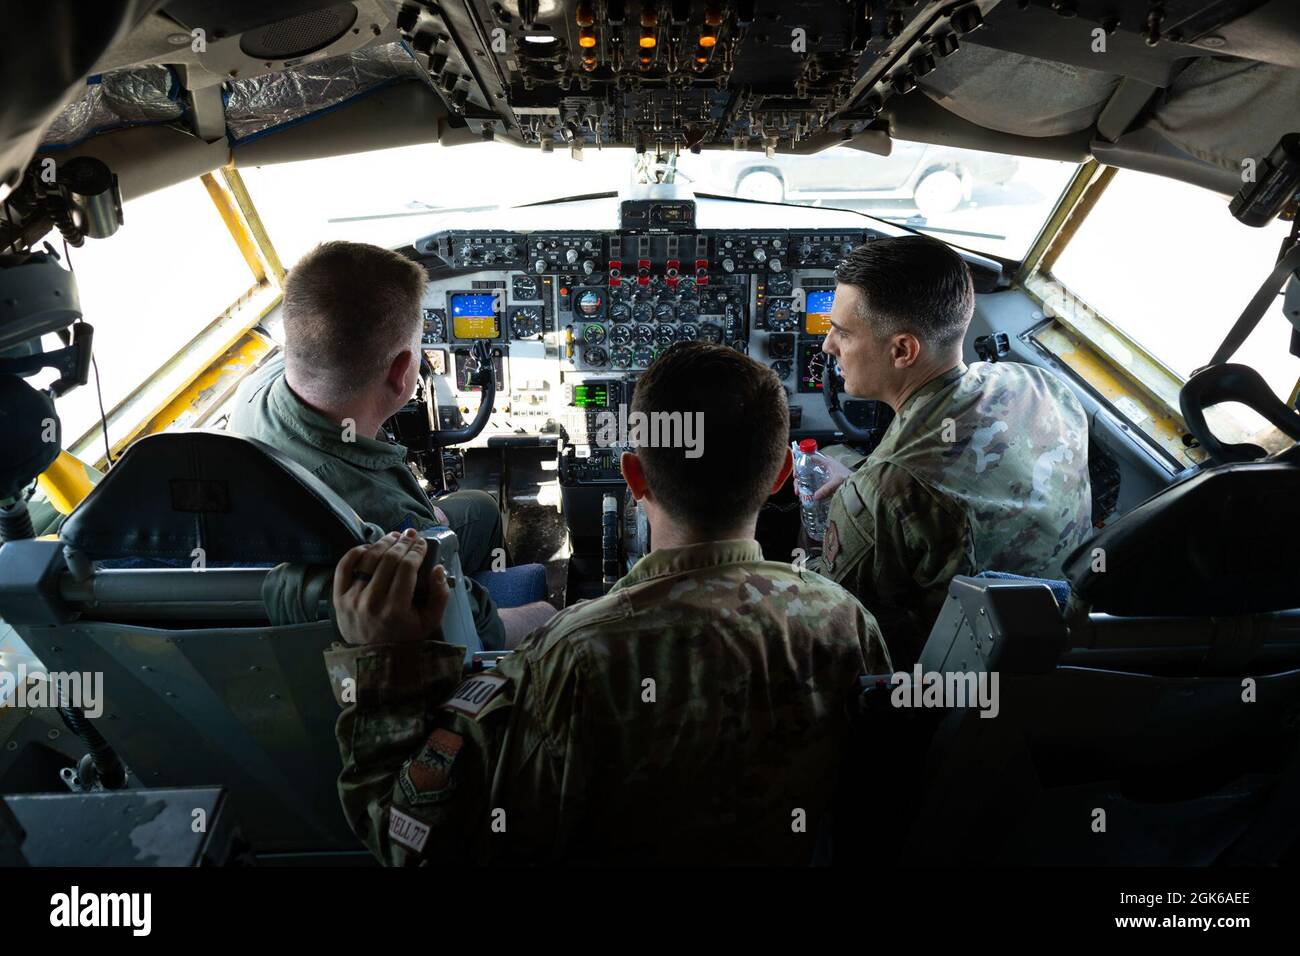 Maj. Frank Simon (center), 93rd Expeditionary Air Refueling Squadron director of operations, showcases the cockpit of a KC-135 Stratotanker to Col. Jason Gingrich (left), 39th Air Base Wing commander, and Chief Master Sgt. Scott Shrier, 39th ABW command chief, during an immersion tour of the 93rd EARS at Incirlik Air Base, Turkey, Aug. 13, 2021. The command team’s visit was part of a series of immersion tours to demonstrate how each unit supports the 39th ABW and U.S. Air Forces in Europe-Air Forces Africa. The 93rd EARS delivers aerial refueling capabilities to allies and coalition partners, Stock Photo